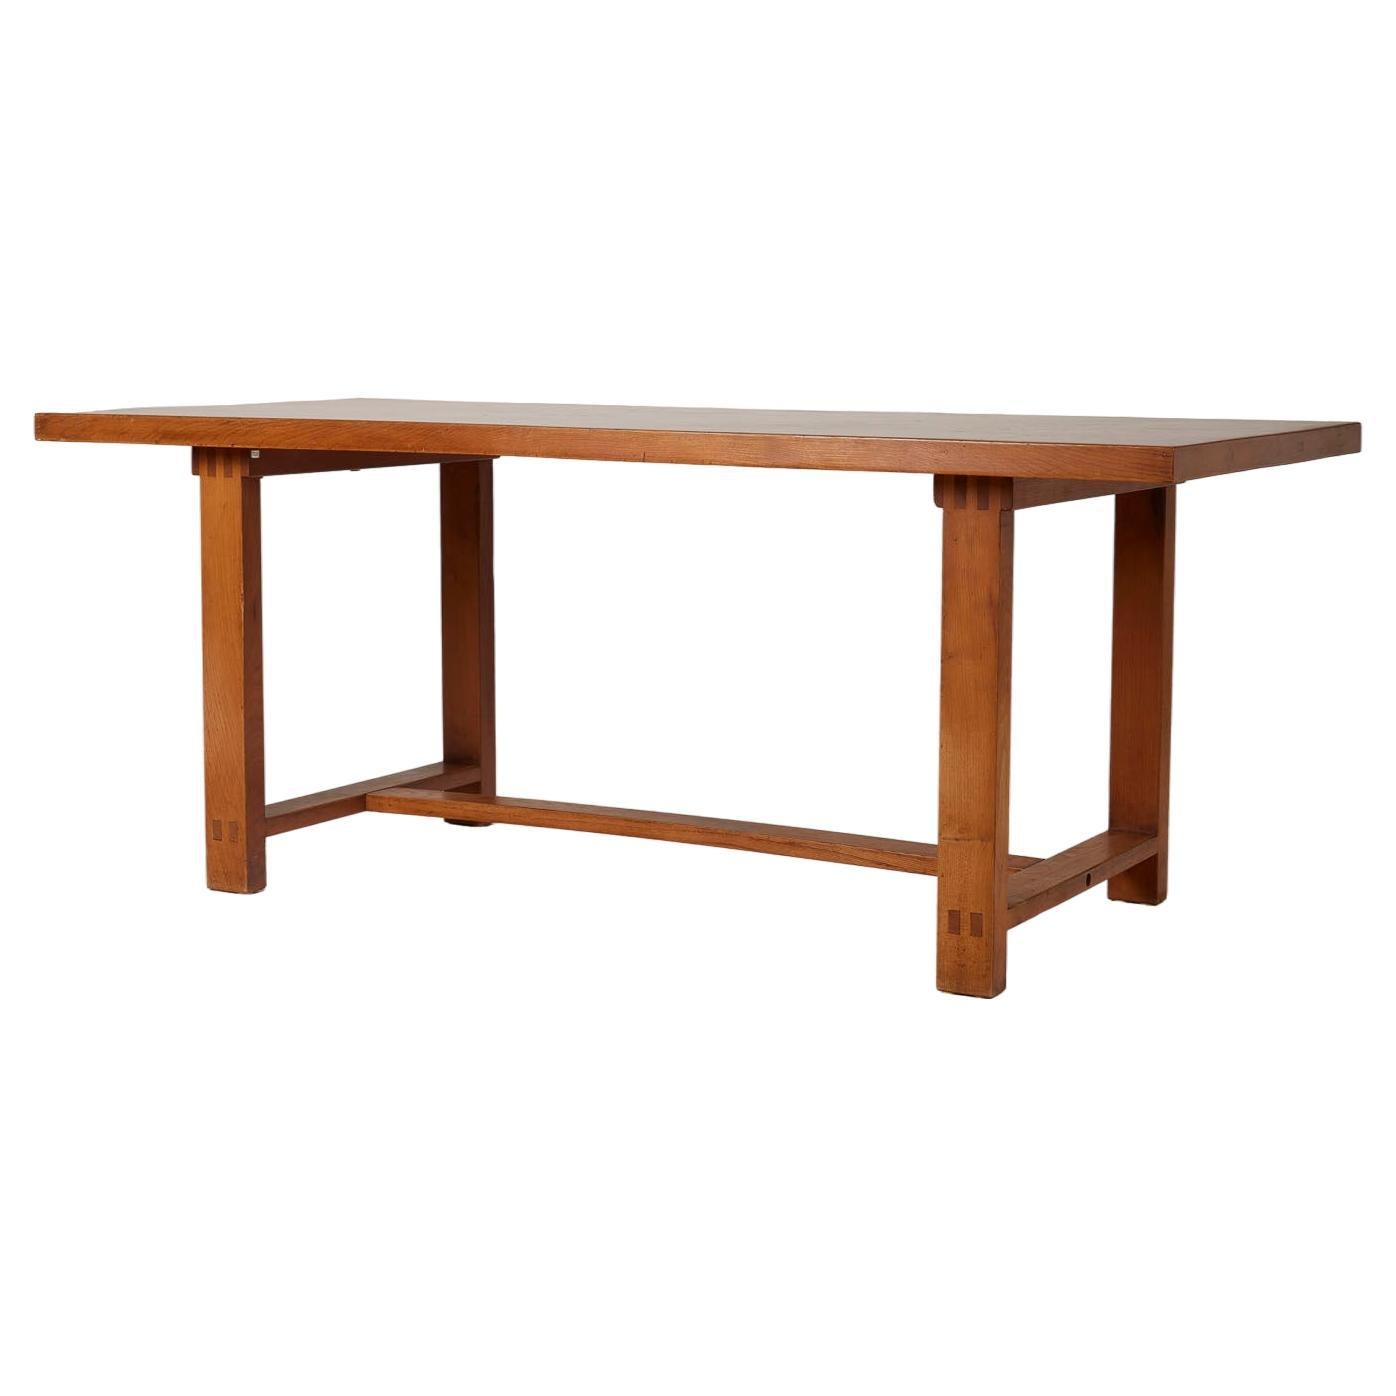 Wooden dining table by Pierre Chapo